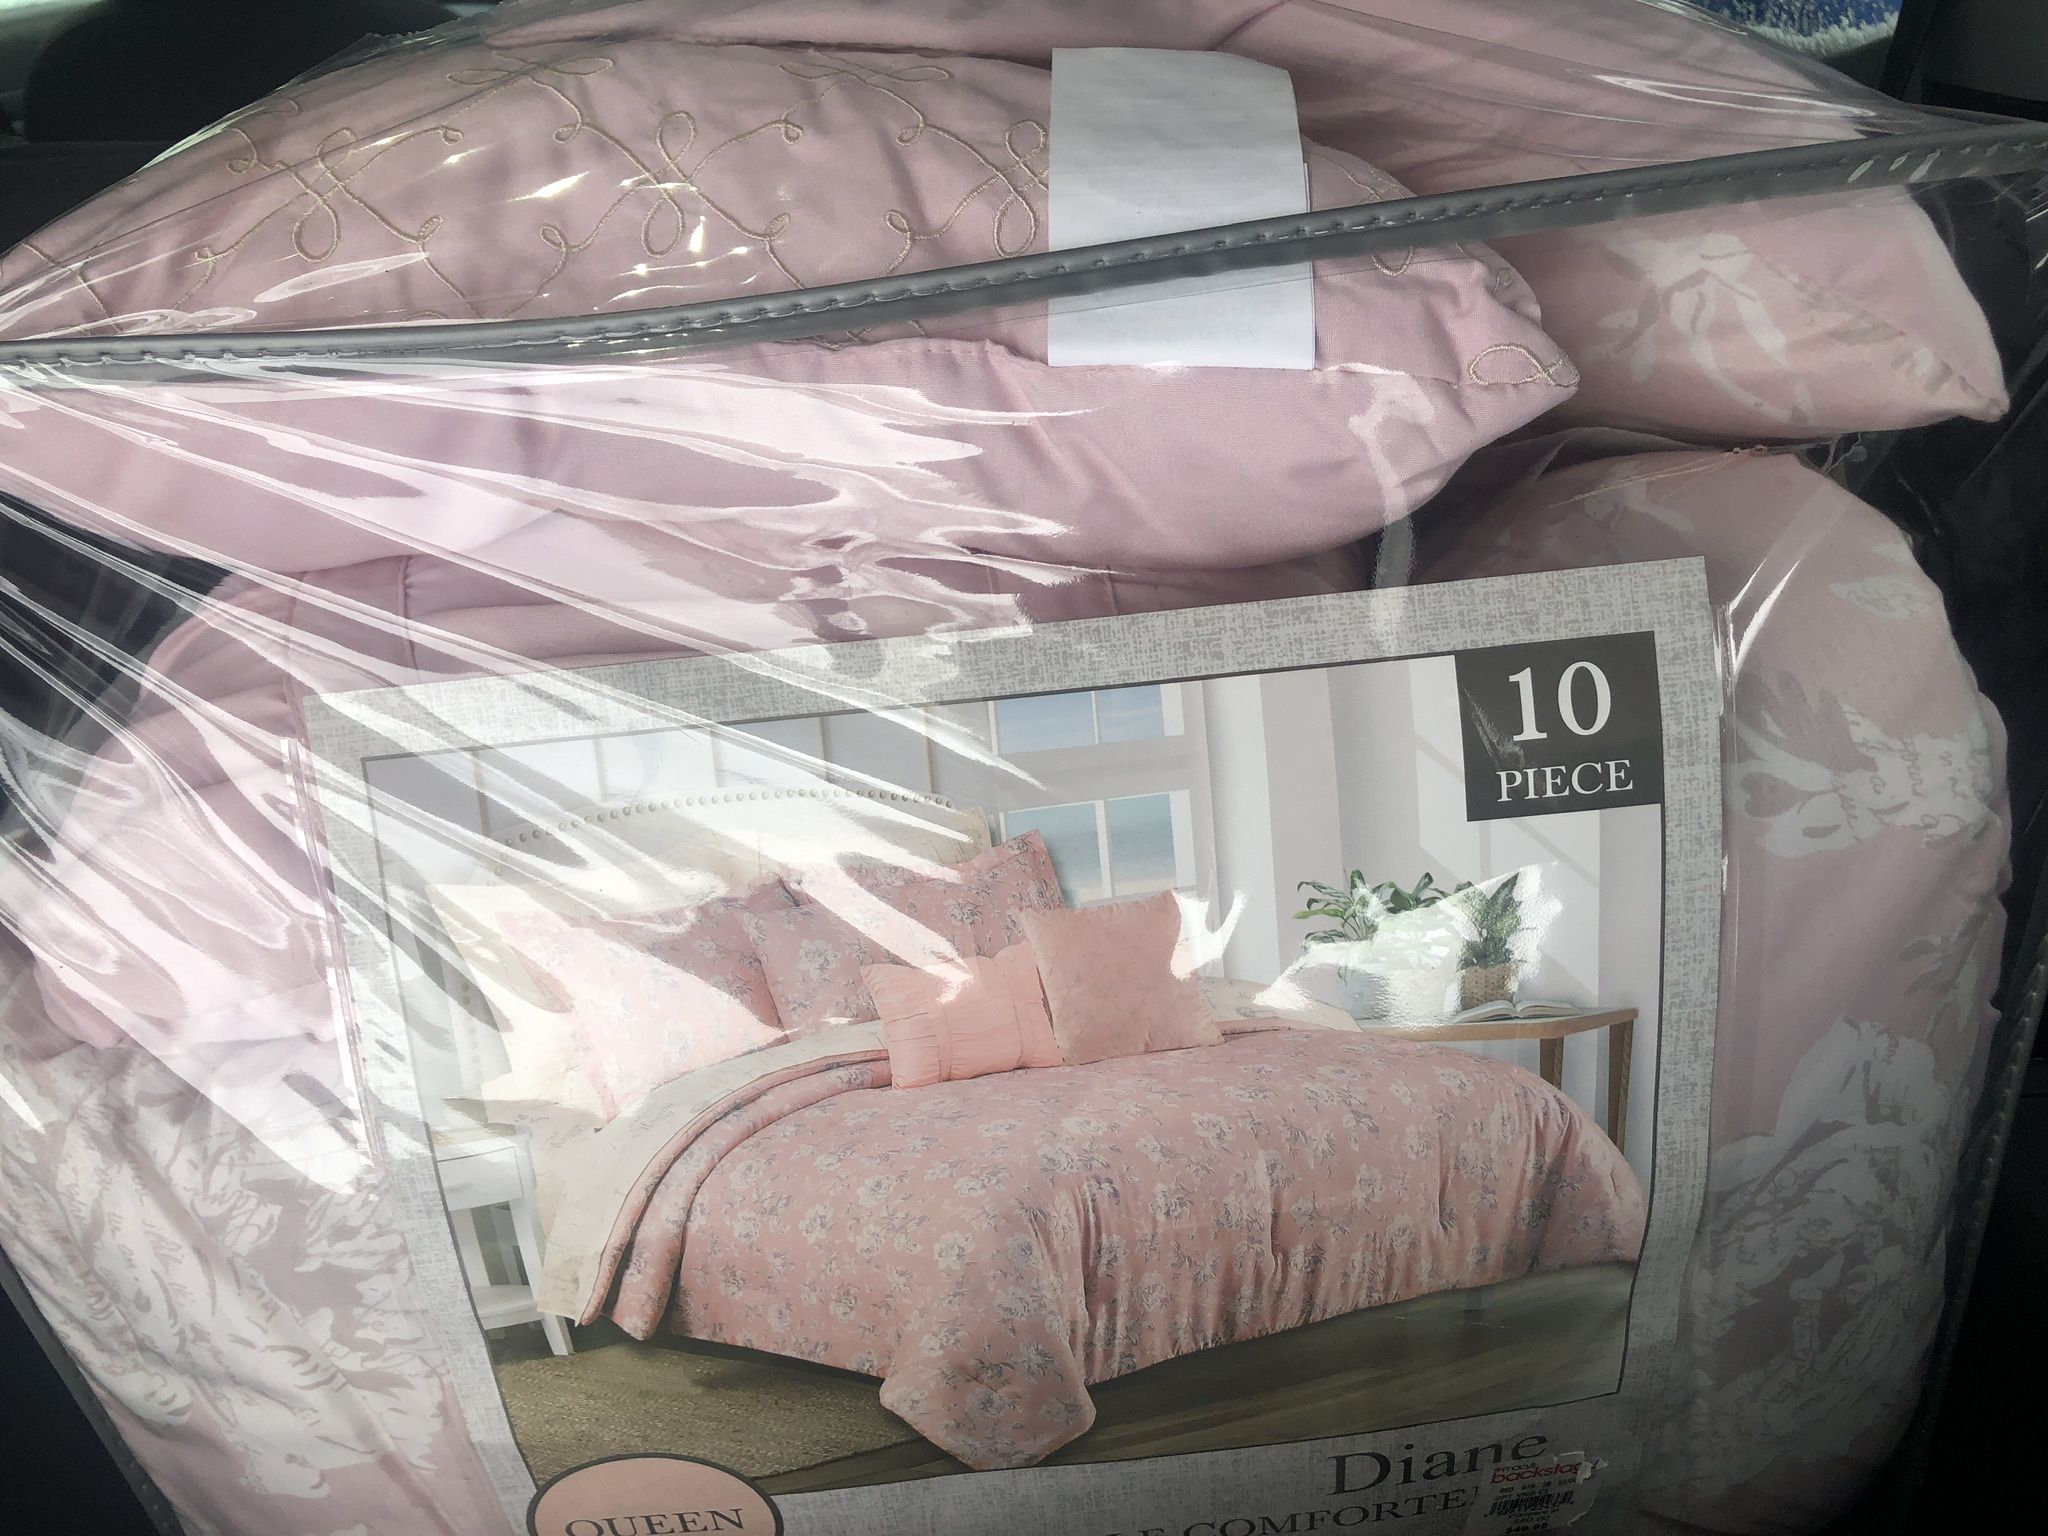 King Size Comforter Set.10 https://offerup.com/redirect/?o=UGllY2VzLm5ldw==.includes Sheets.$80 Or Best Reasonable Offer 